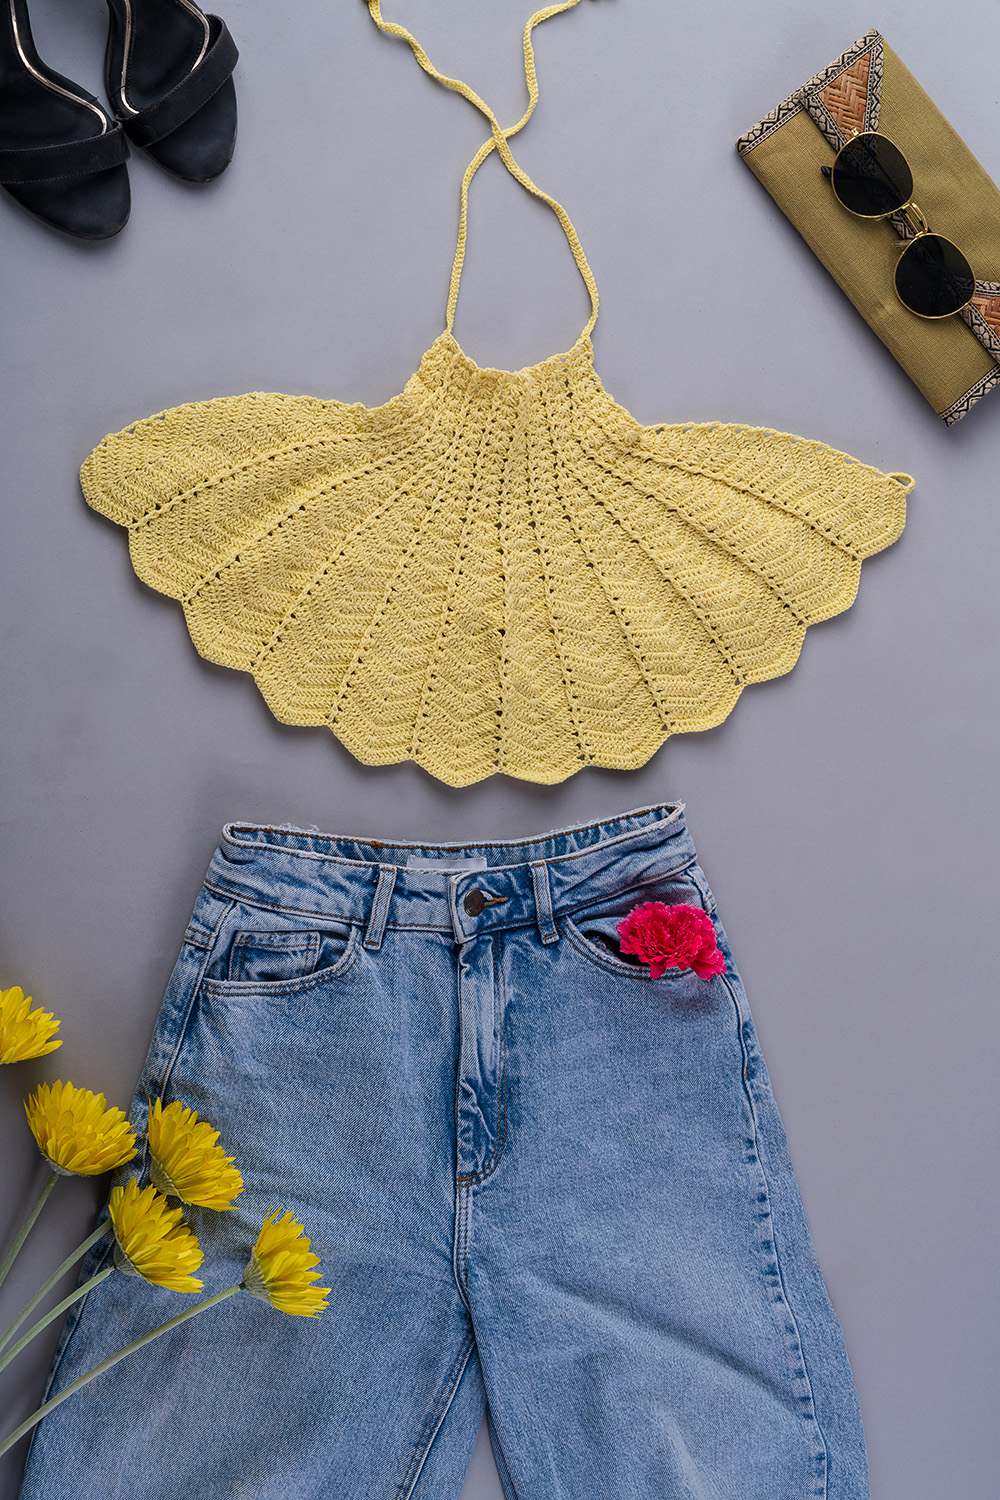 Buy Daffodil Clam Top In the Best Price - Hand Knitted Crochet Top & Bralette